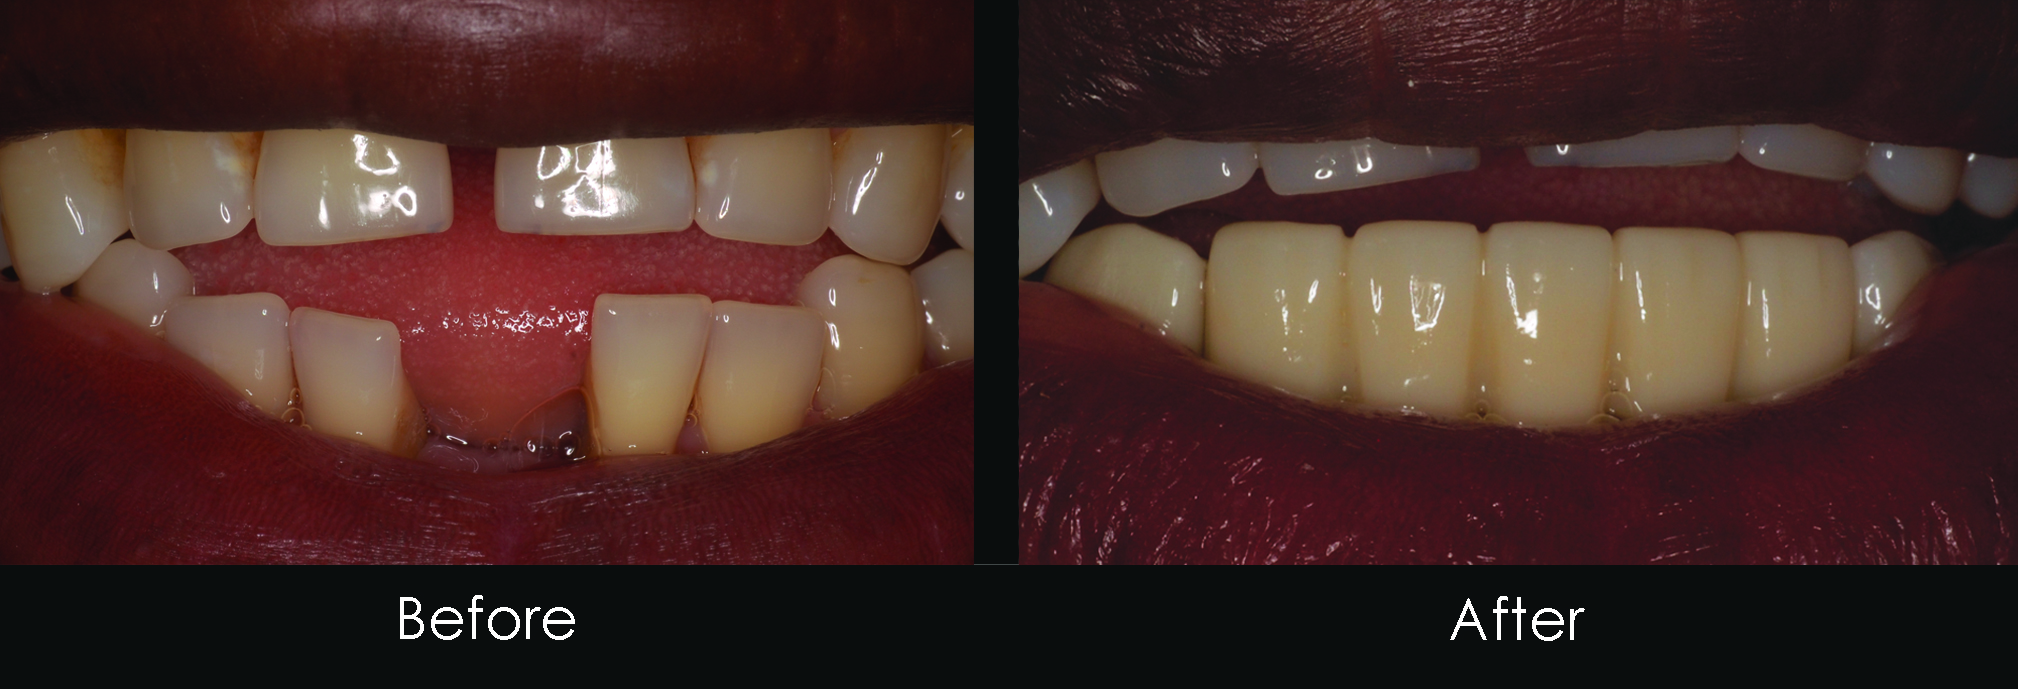 Before and After dental Bridge